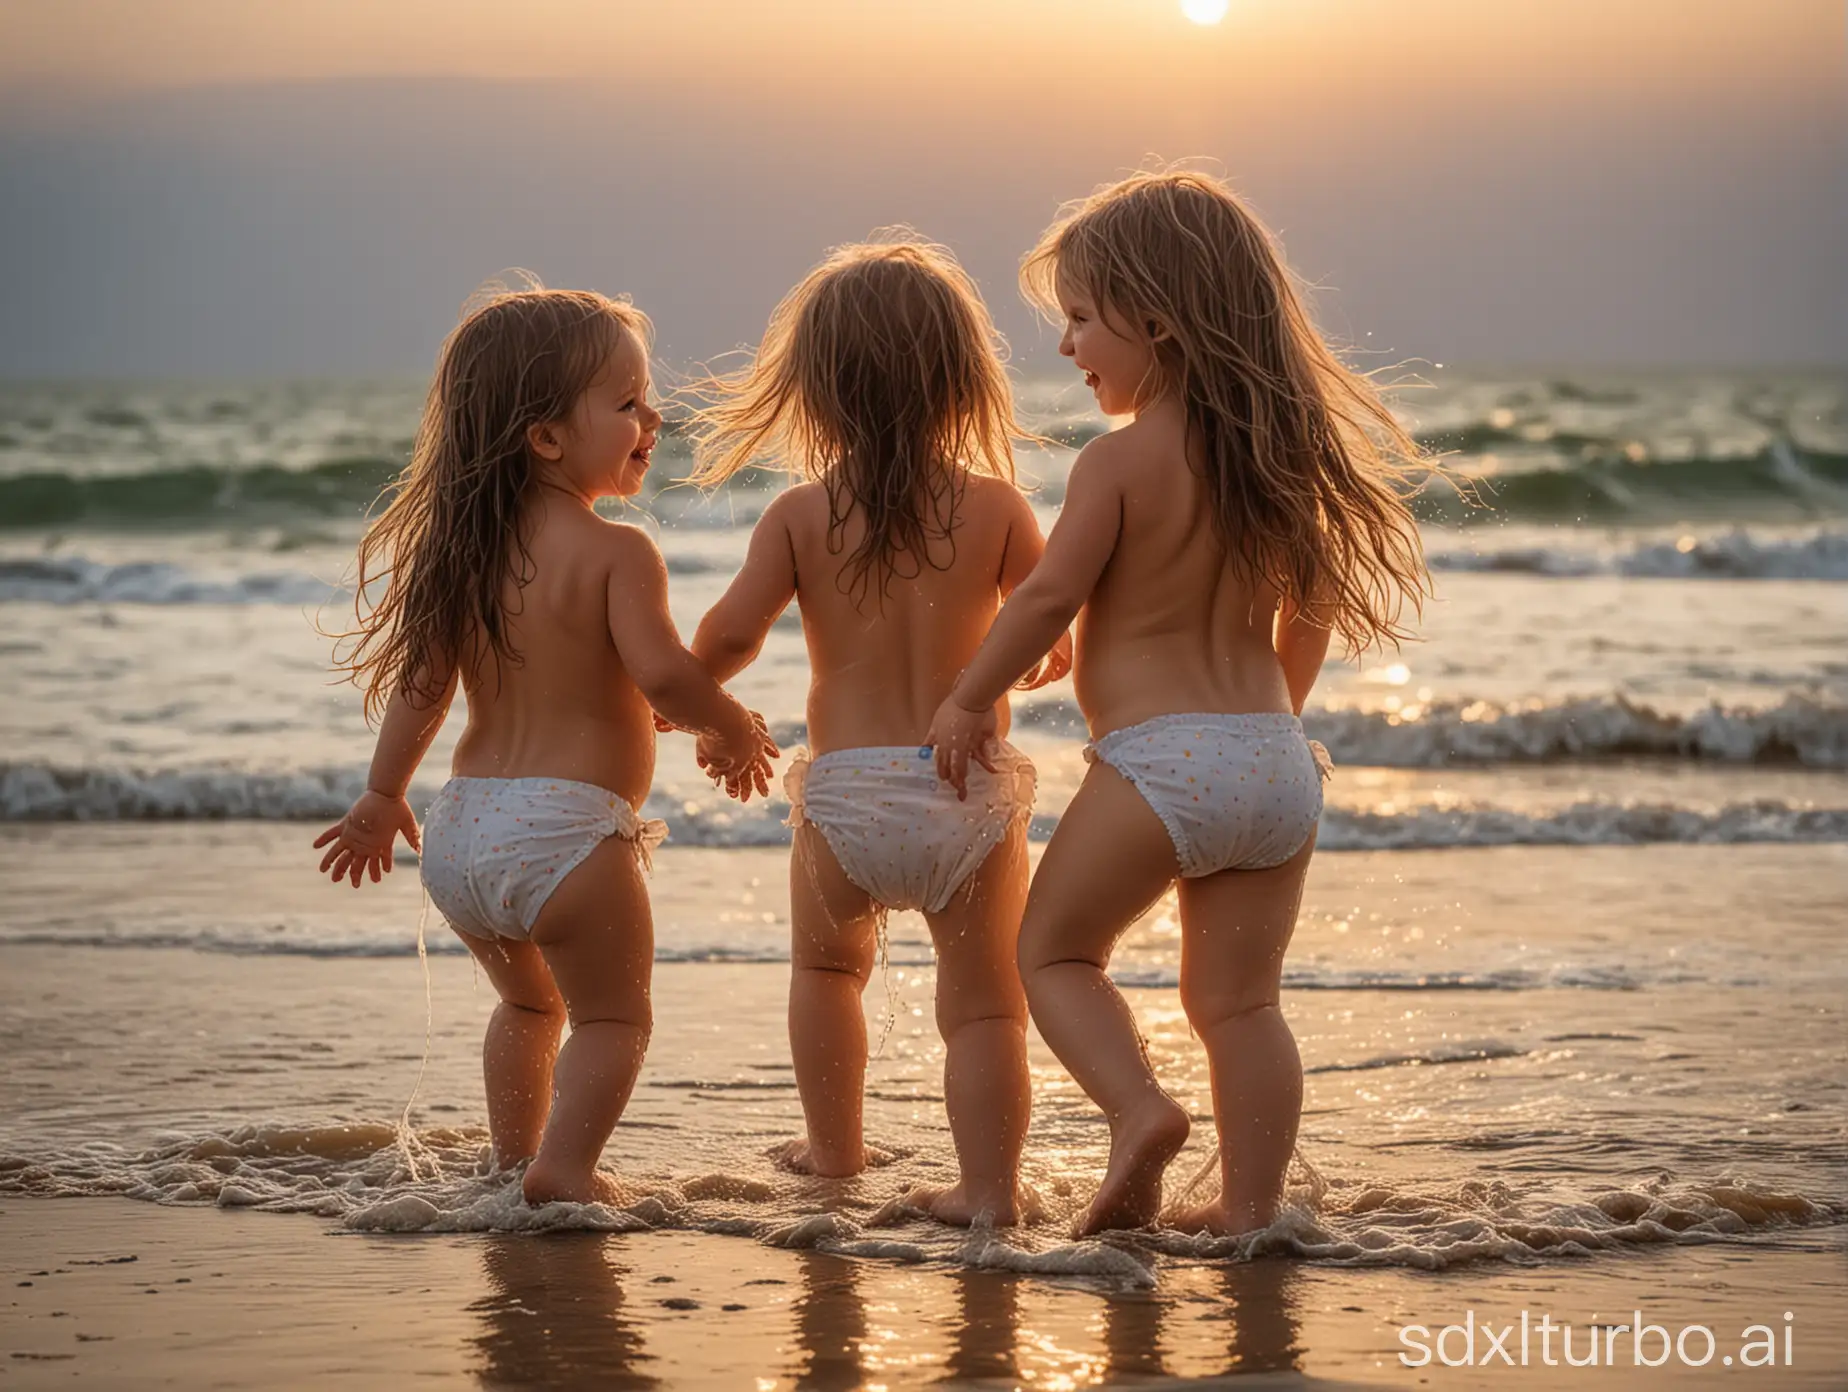 Two-Young-Girls-Playing-Shirtless-on-Beach-at-Sunset